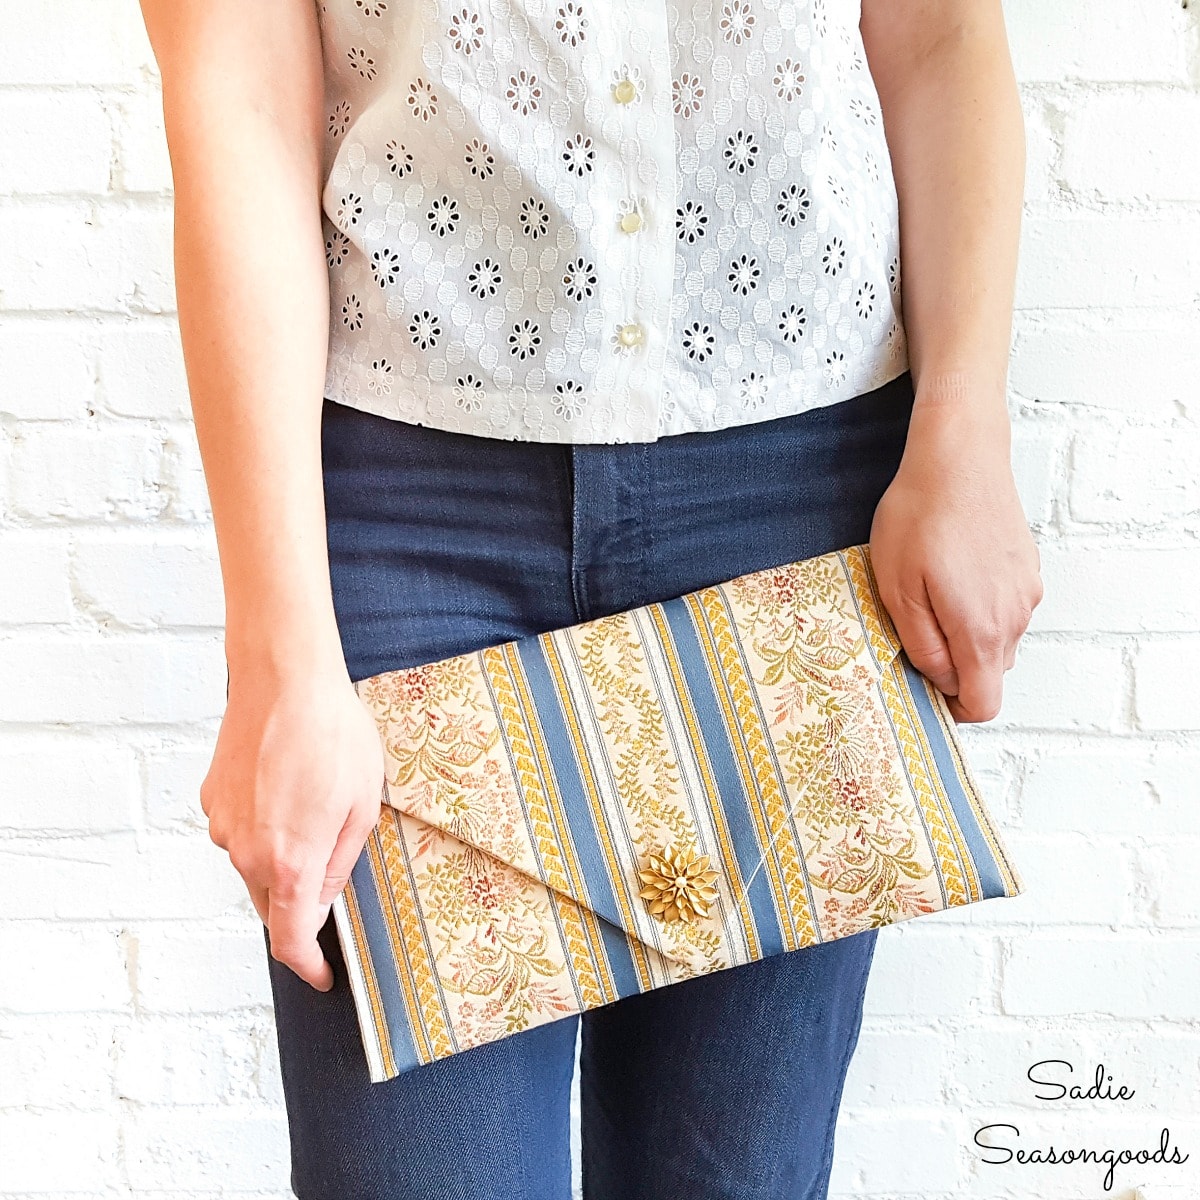 Making an Envelope Clutch or Small Handbag from a Table Runner